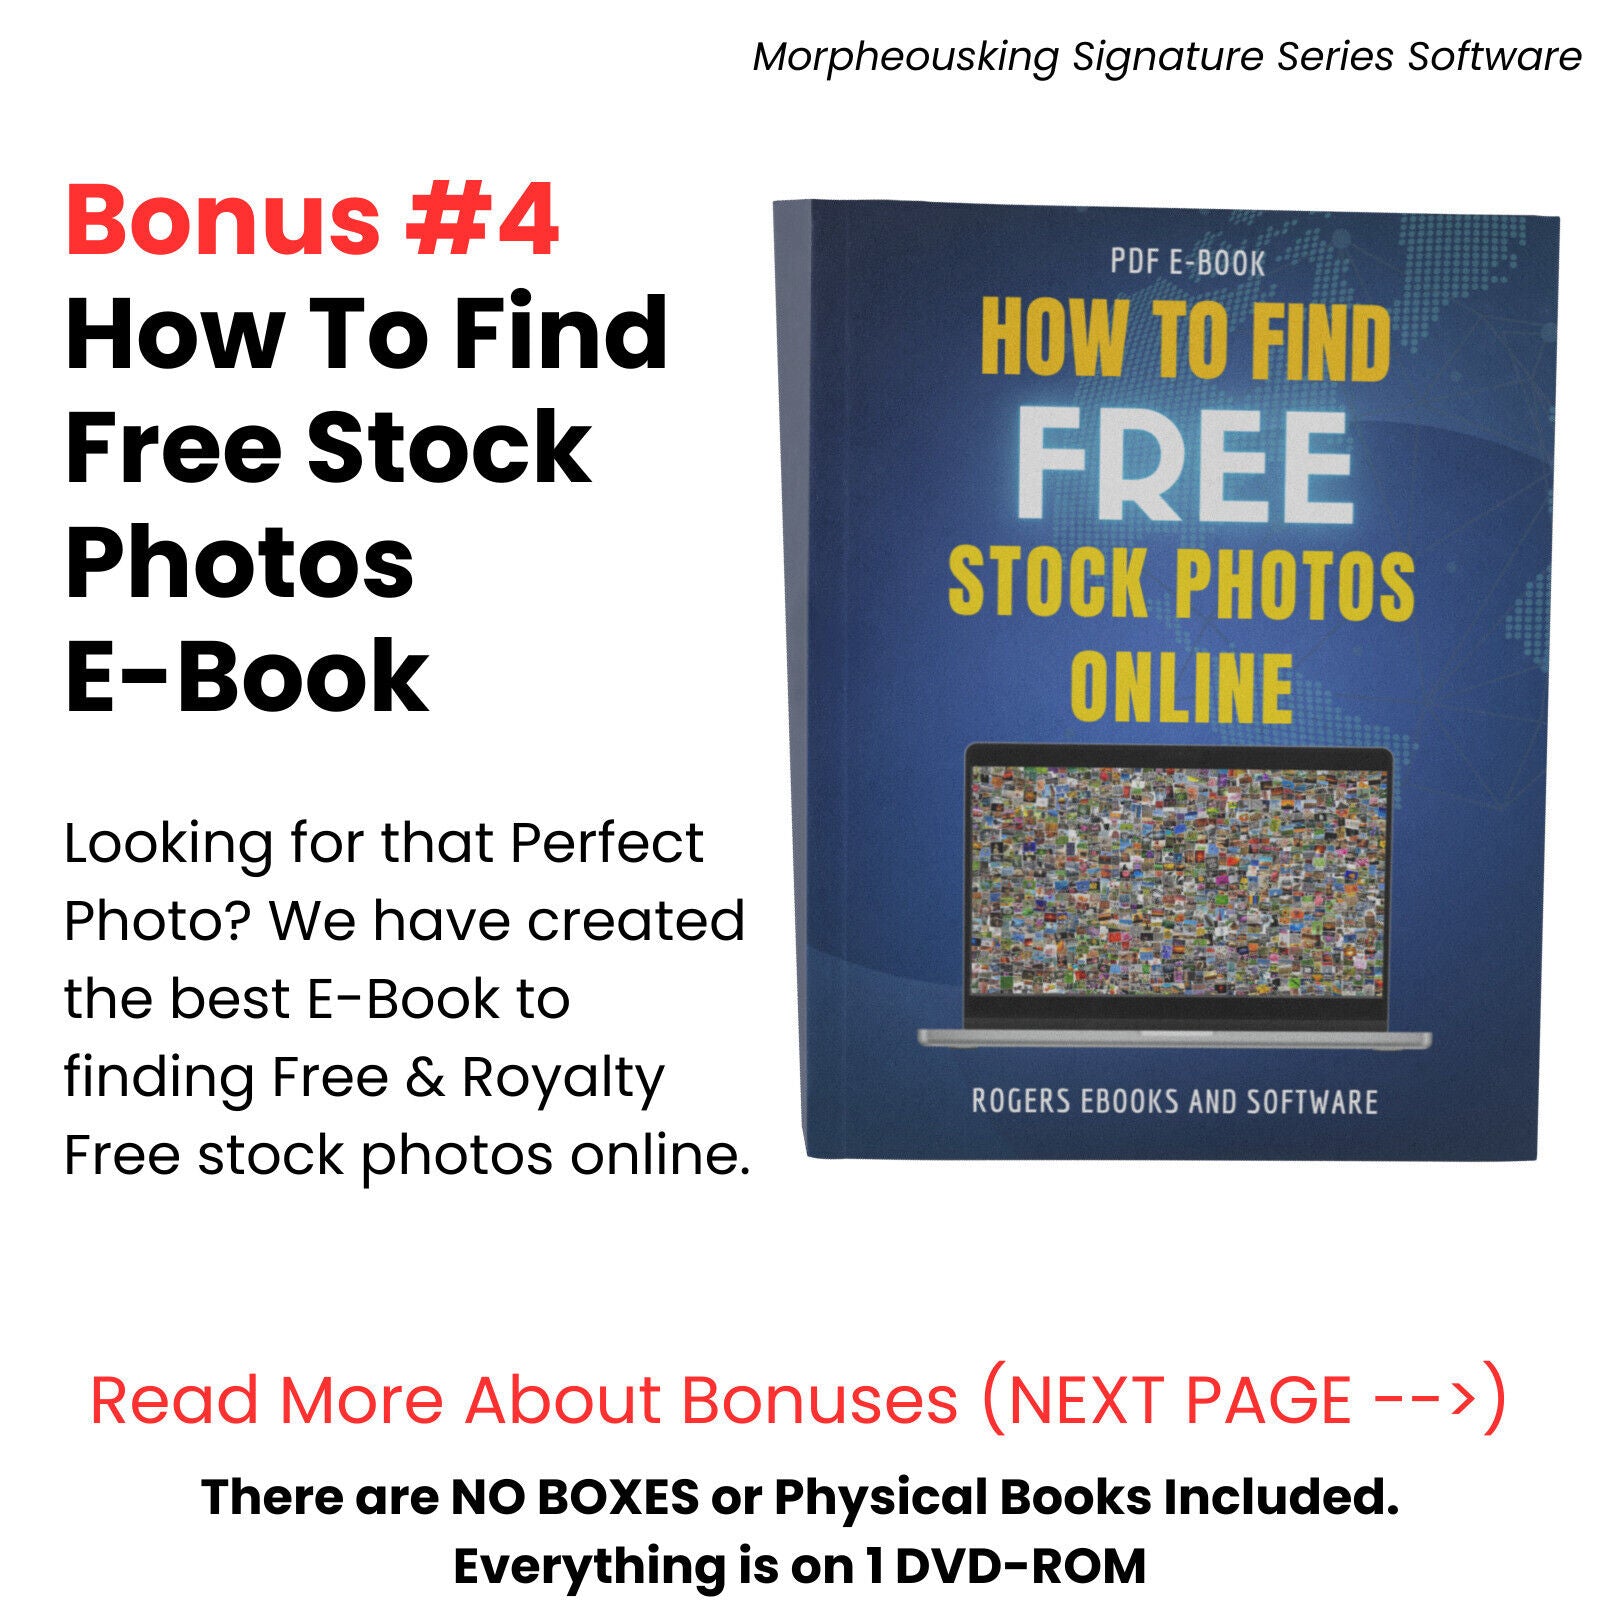 Apache Open Office 2023 Professional Ultimate Edition Bundle on DVD Bonus #4 How to Find Free Stock Photos E-Book